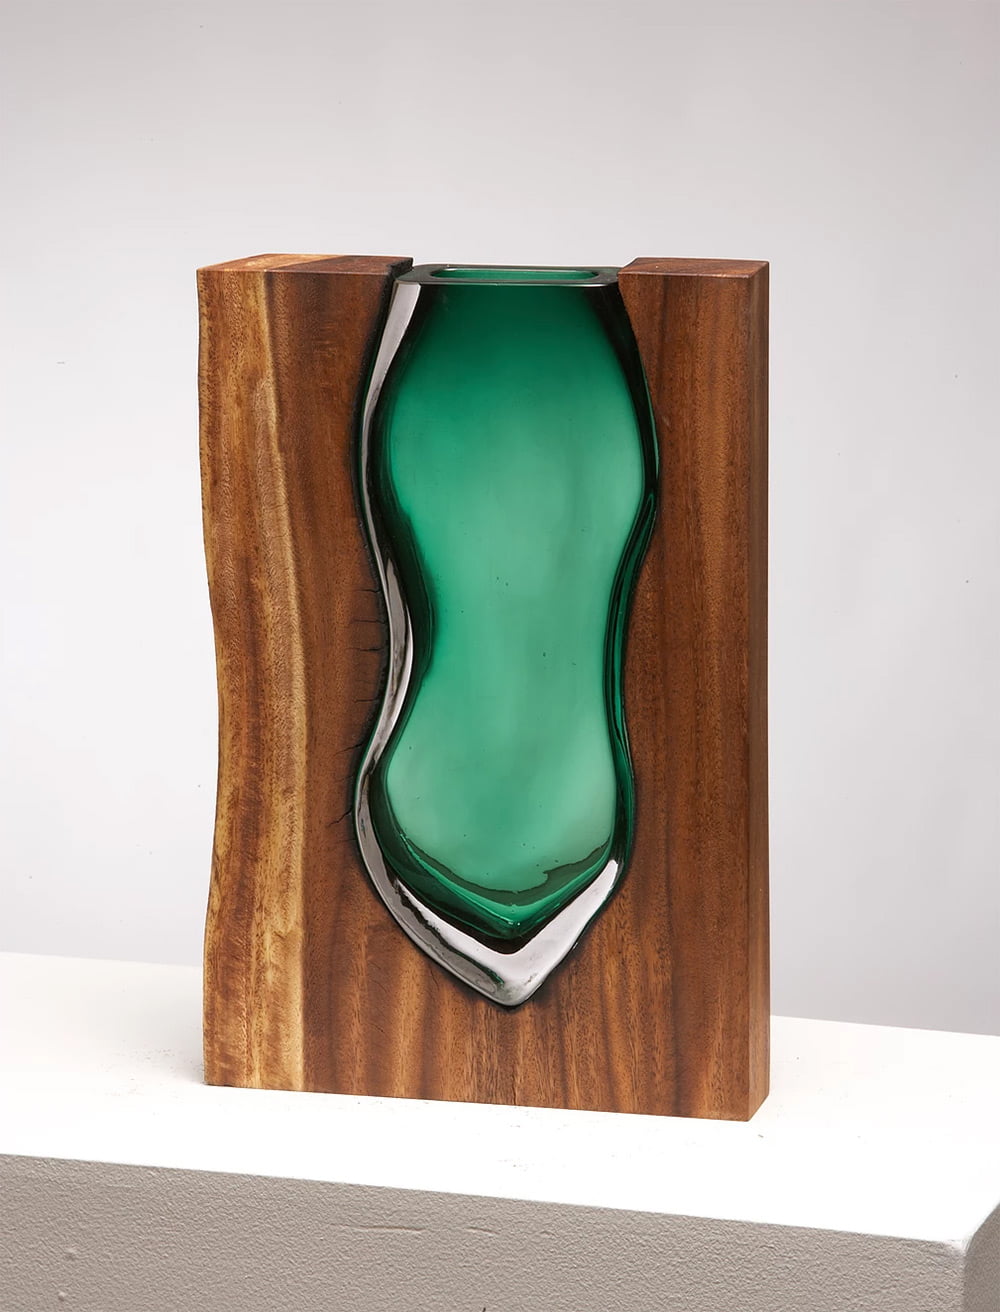 Wood Glass Glass Vases Shaped Into Wooden Enclosures By Scott Slagerman 1